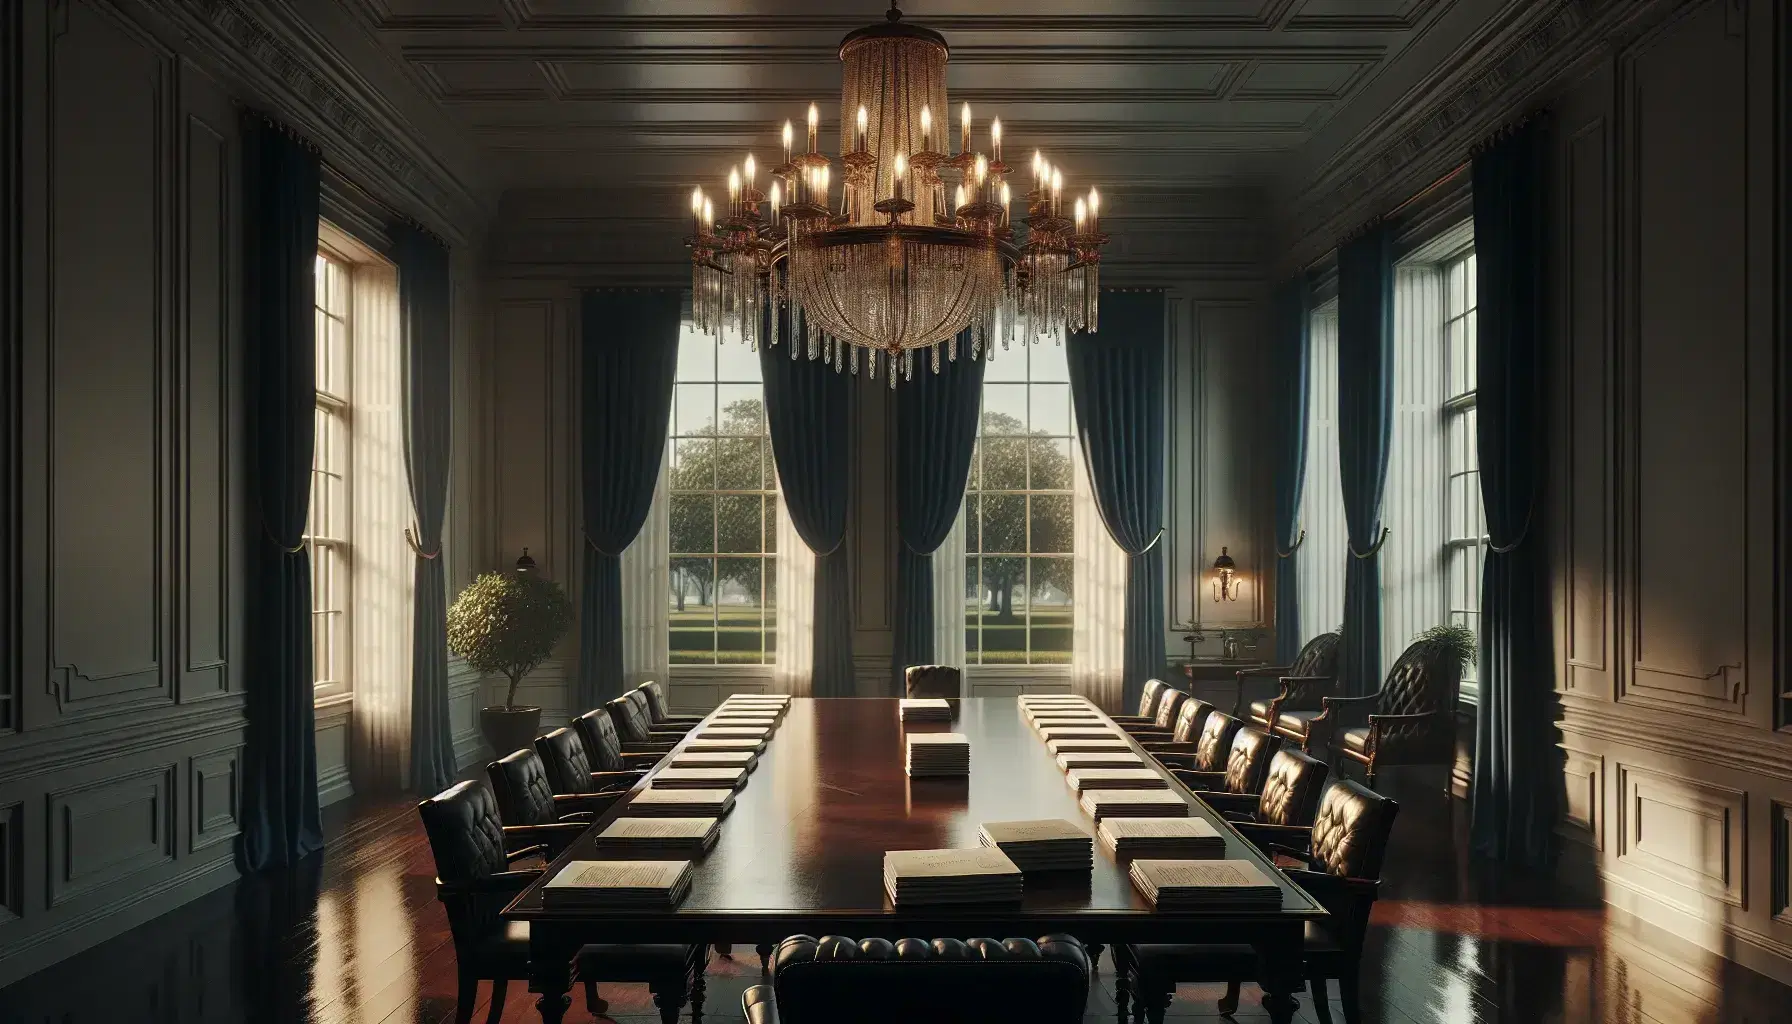 Elegant meeting room with a long dark wood table, high-back leather chairs, and a glass-brass chandelier, with arched windows overlooking a lawn.